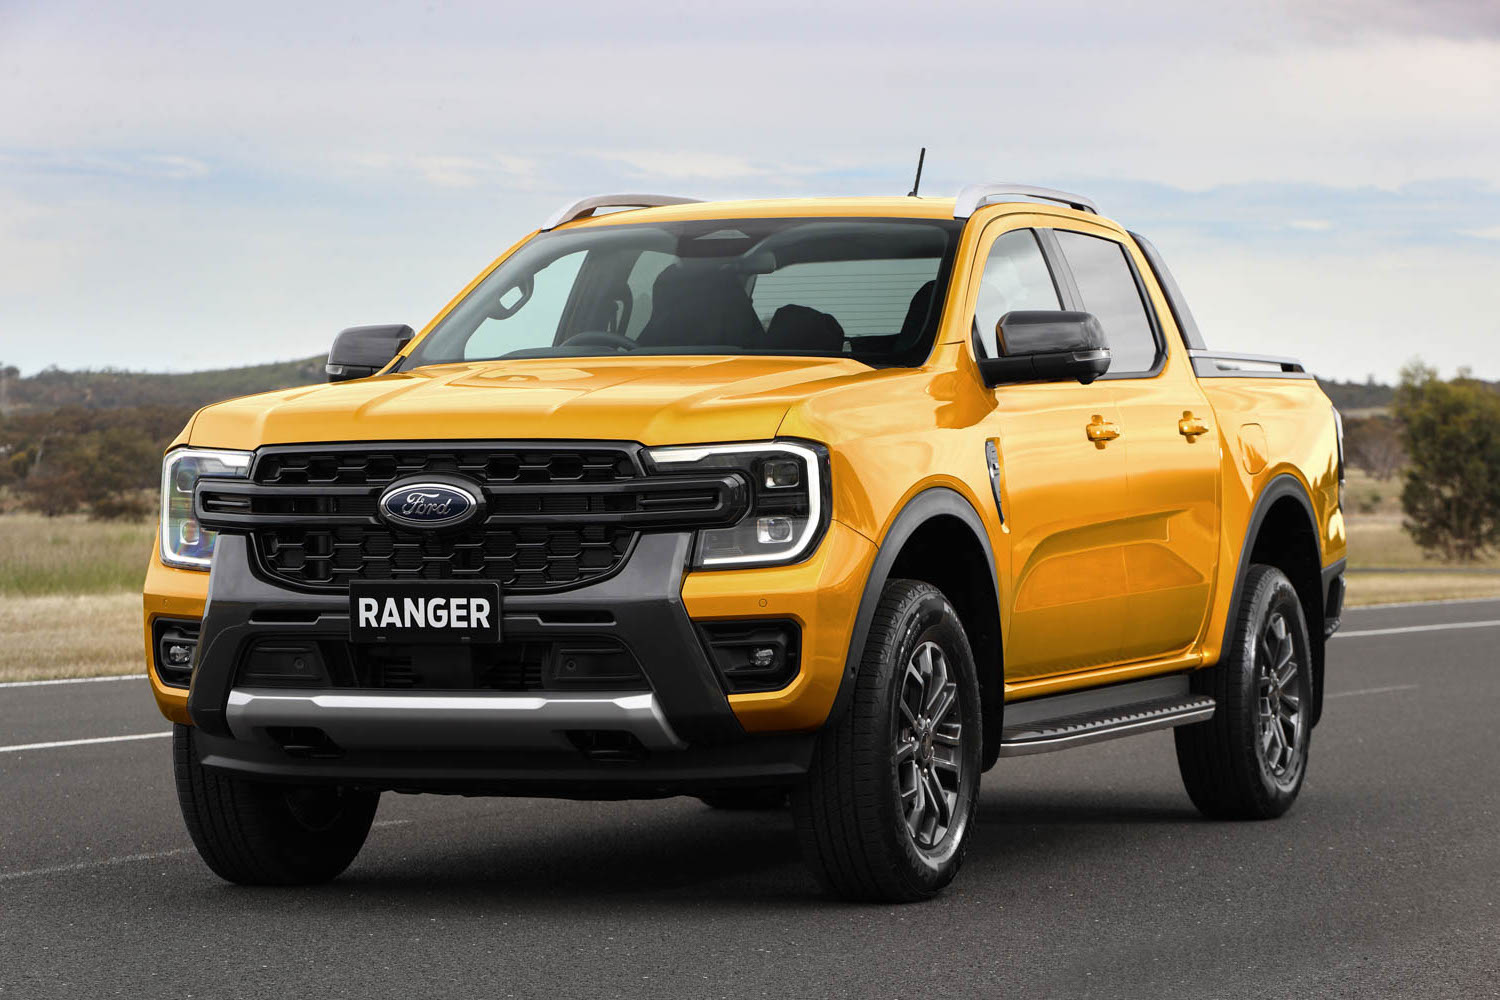 Van News | Ford shows off the new Ranger pickup | CompleteVan.ie